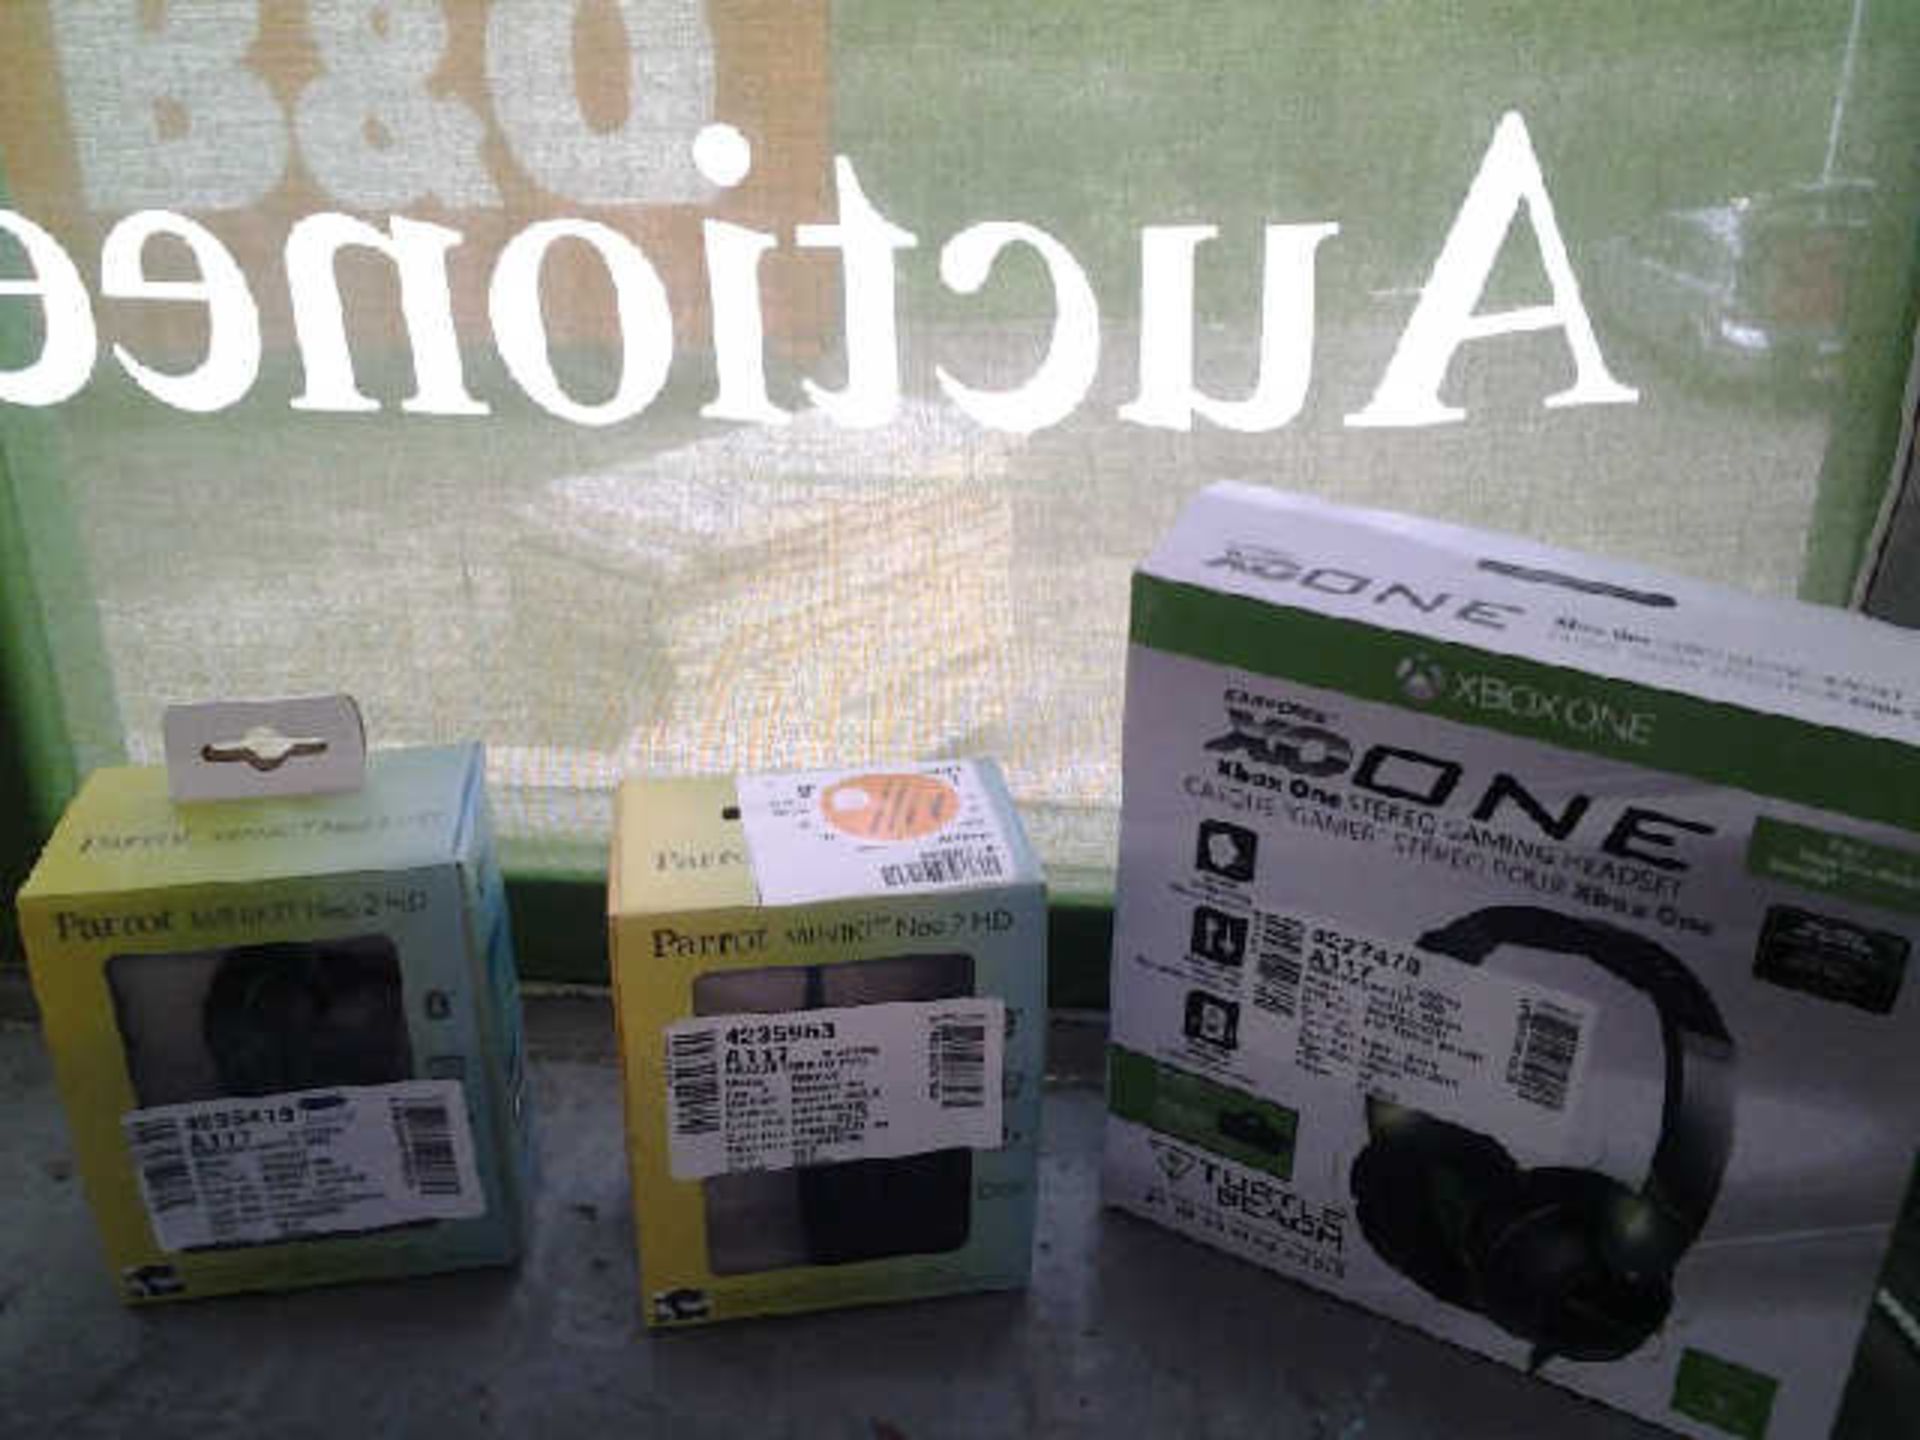 APPROX 3 ITEMS INCLUDING XBOX ONE TURTLEBEACH EARFORCE HEADPHONES AND 2 X PARROT MINIKIT NEO 2 HD...